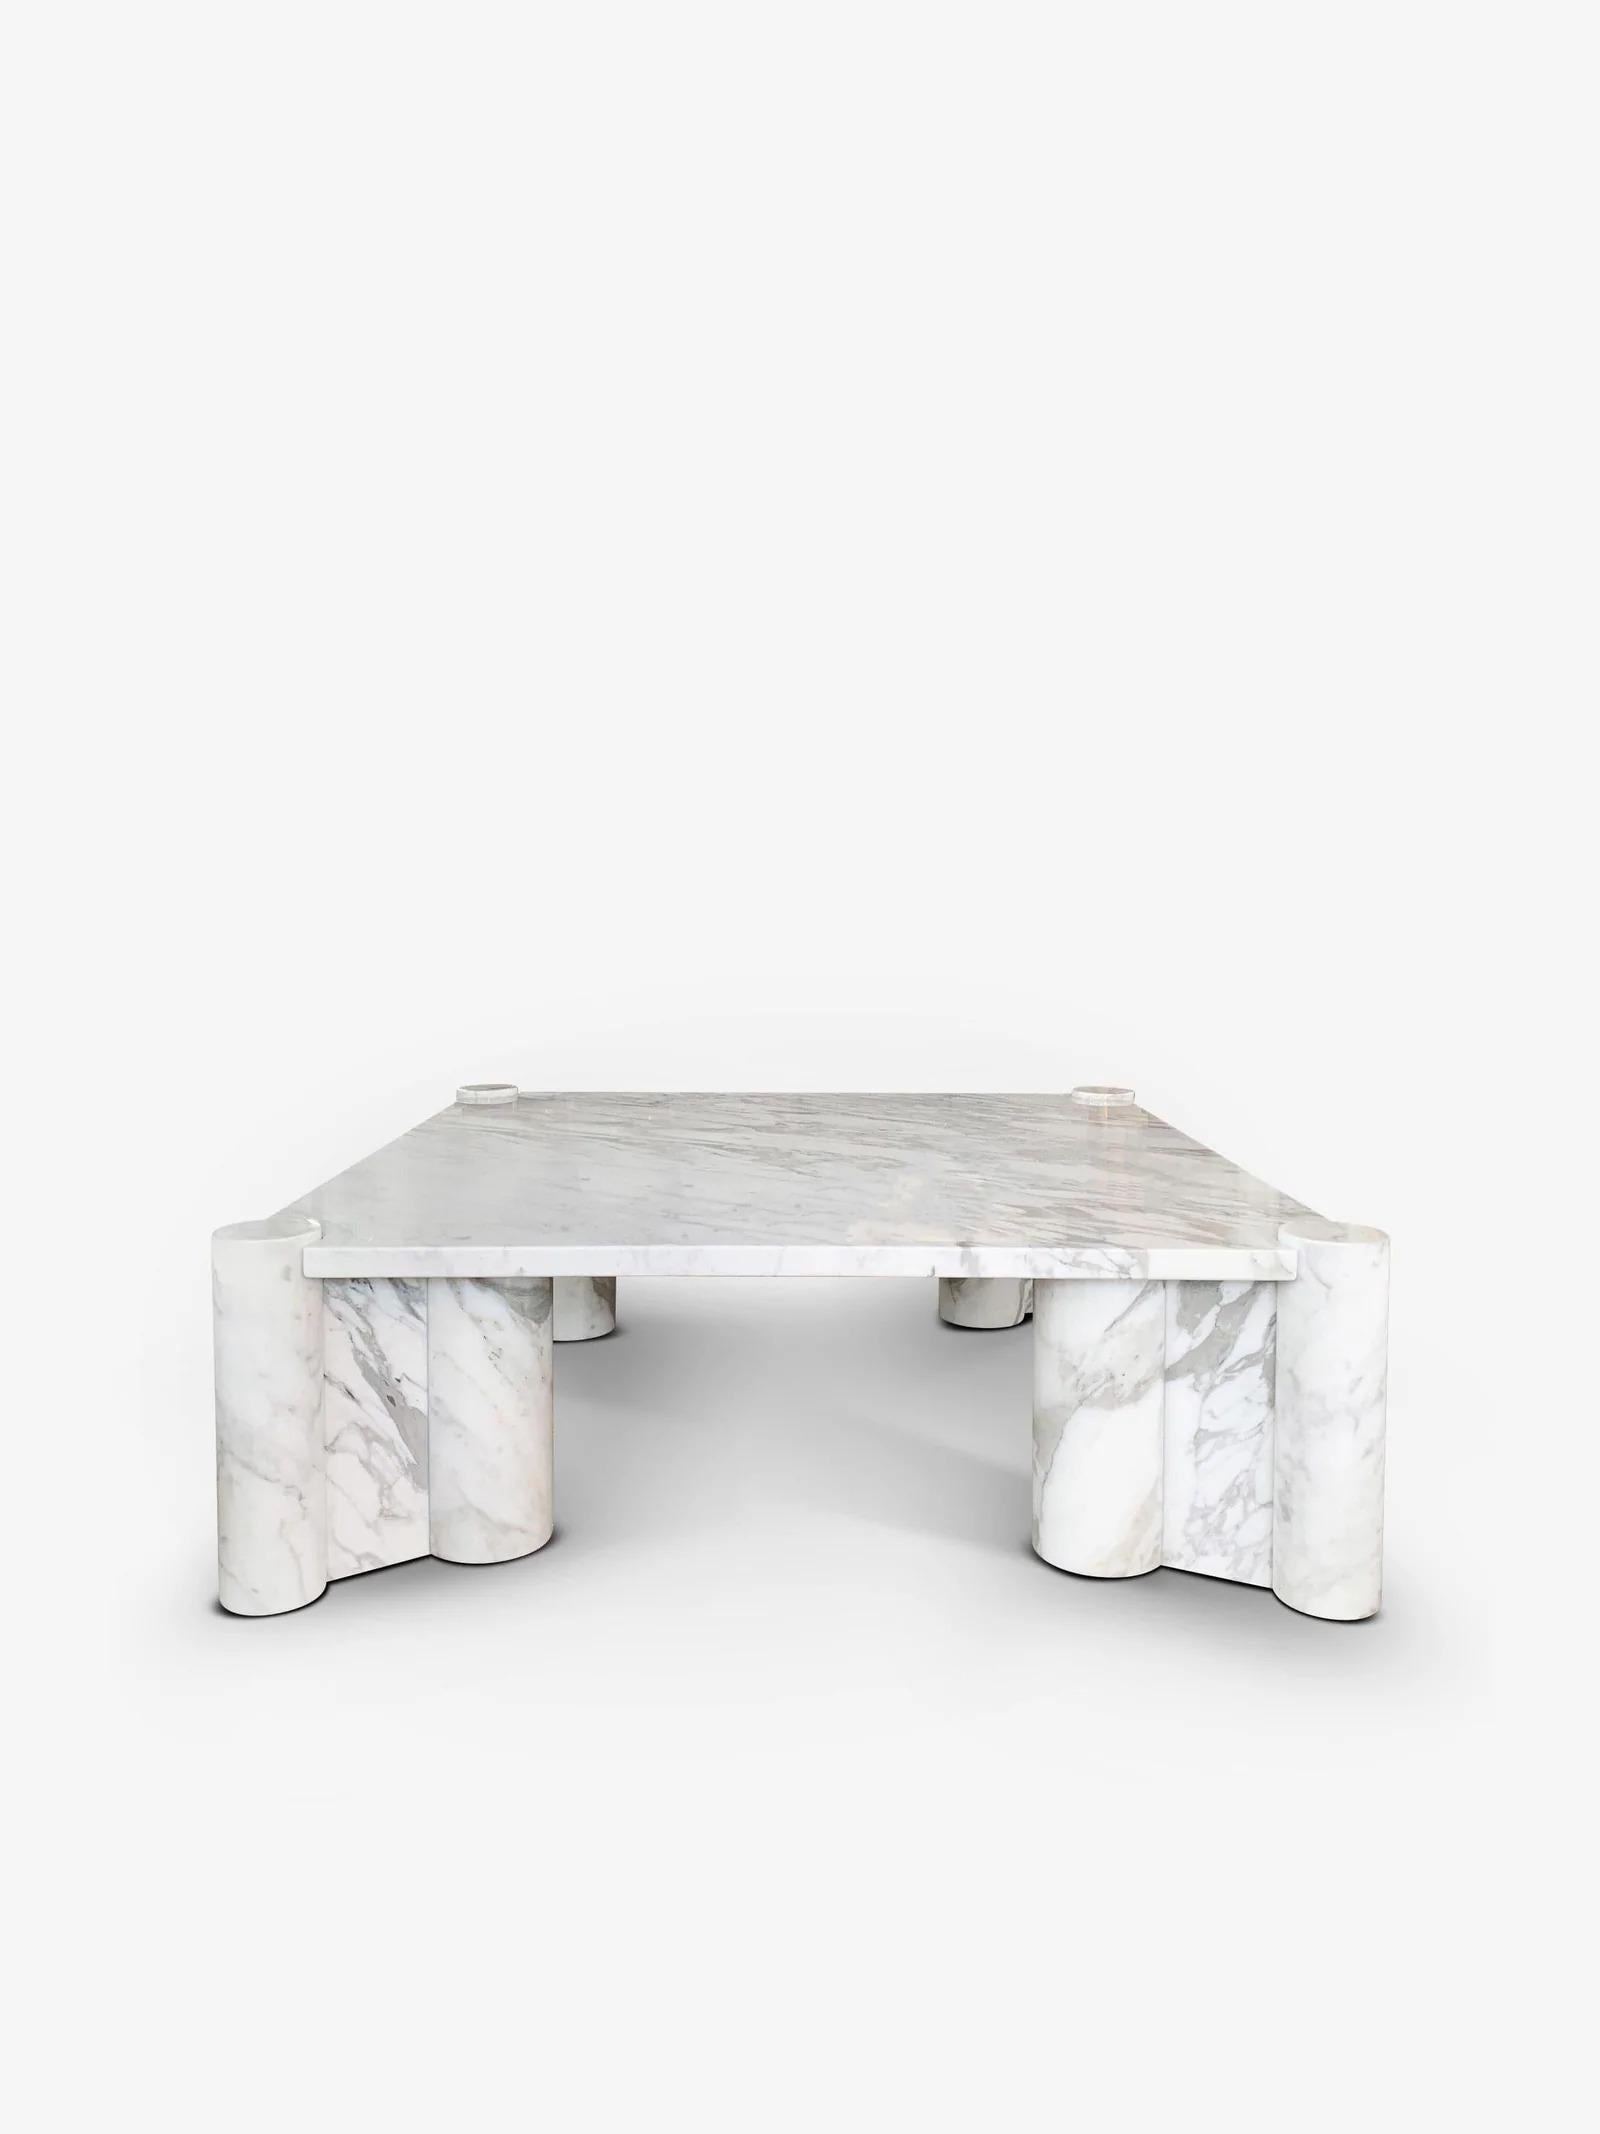 Gae Aulenti Jumbo Table in Arabascato Marble In New Condition In Sag Harbor, NY